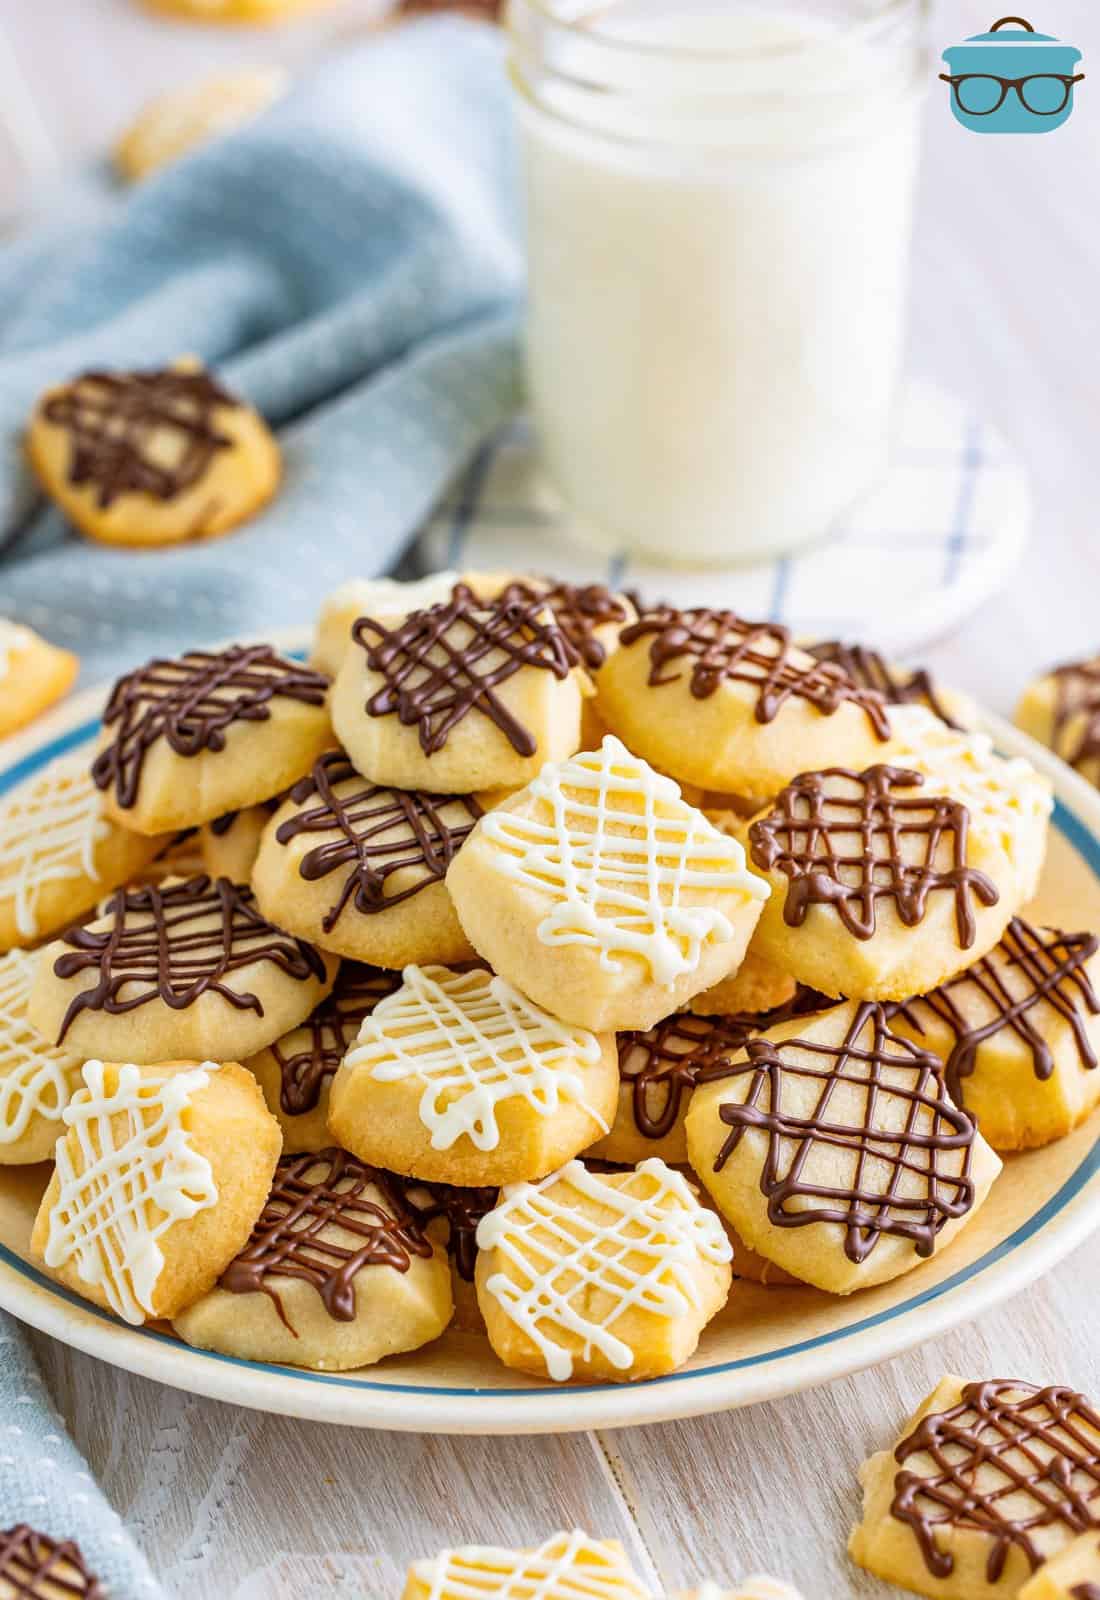 A plate of chocolate drizzled shortbread cookies with a glass of milk.